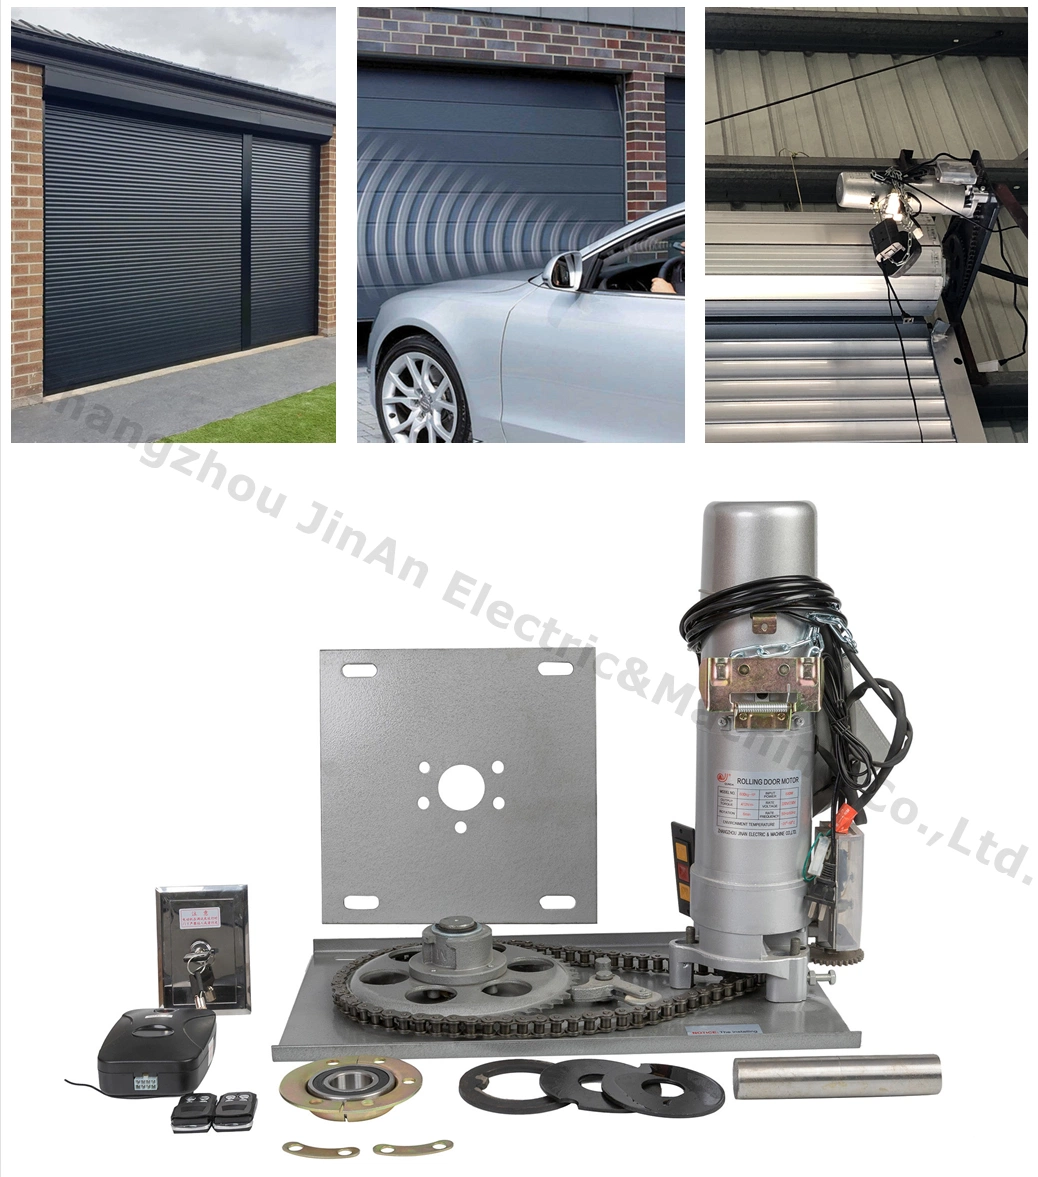 Electric Motor for Rolling Door Automatic Roller Shutter Motor Rolling Door Motor Garage Door Motor with Remote Control